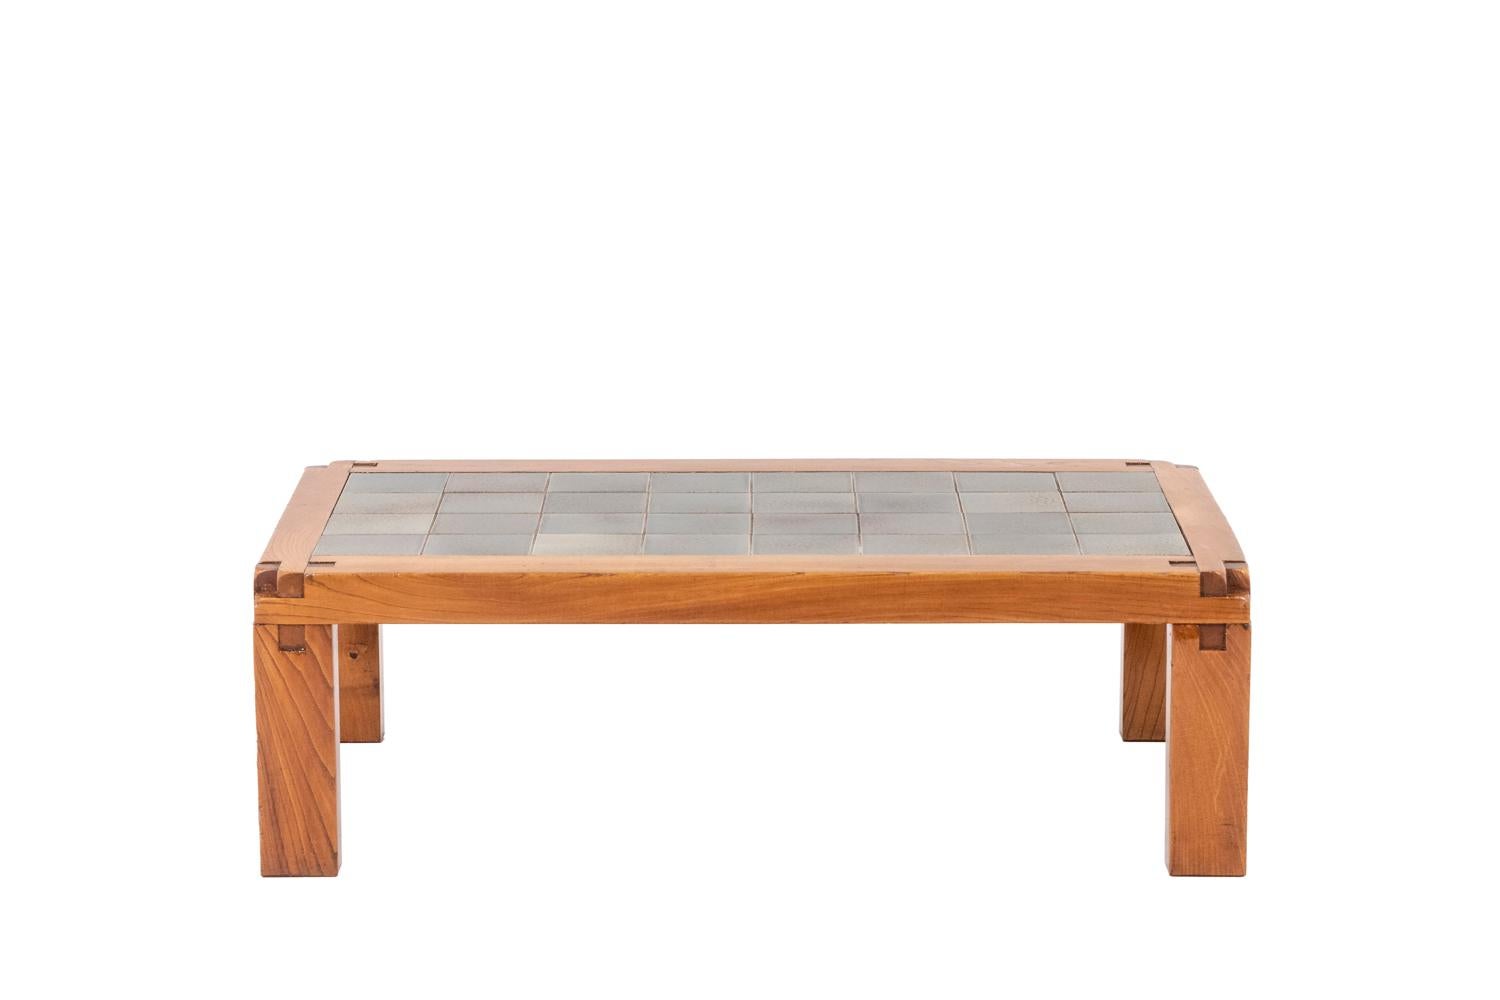 Pierre Chapo, signed.

Coffee table, model T18, in blond solid elm, rectangular in shape, with its ceramic top made up of square-shaped tiles in green color. Straight shank assembly.

French work realized in the 1960s.